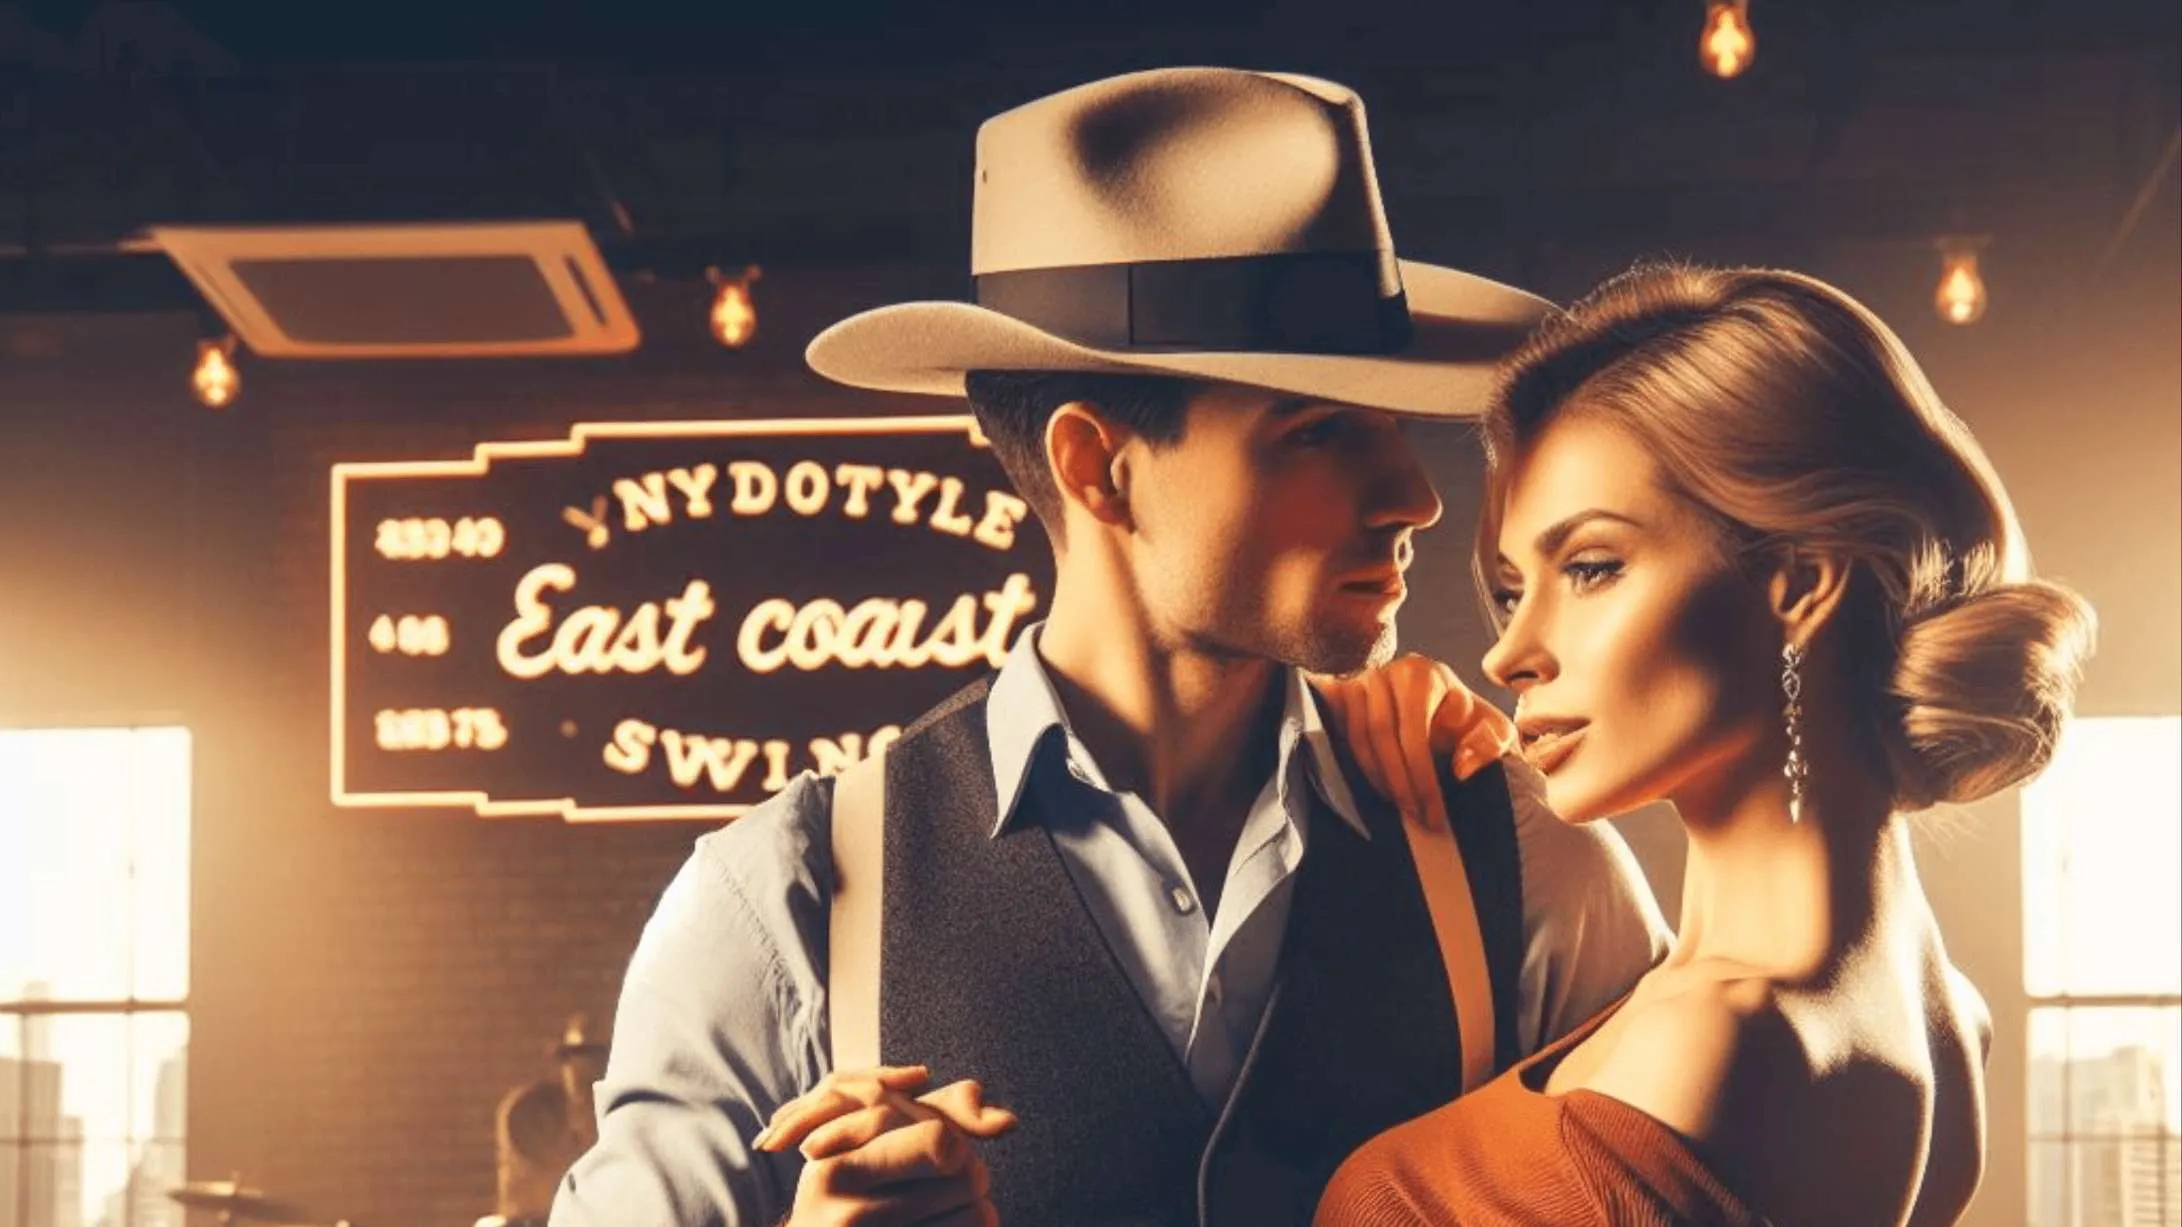 country swing image